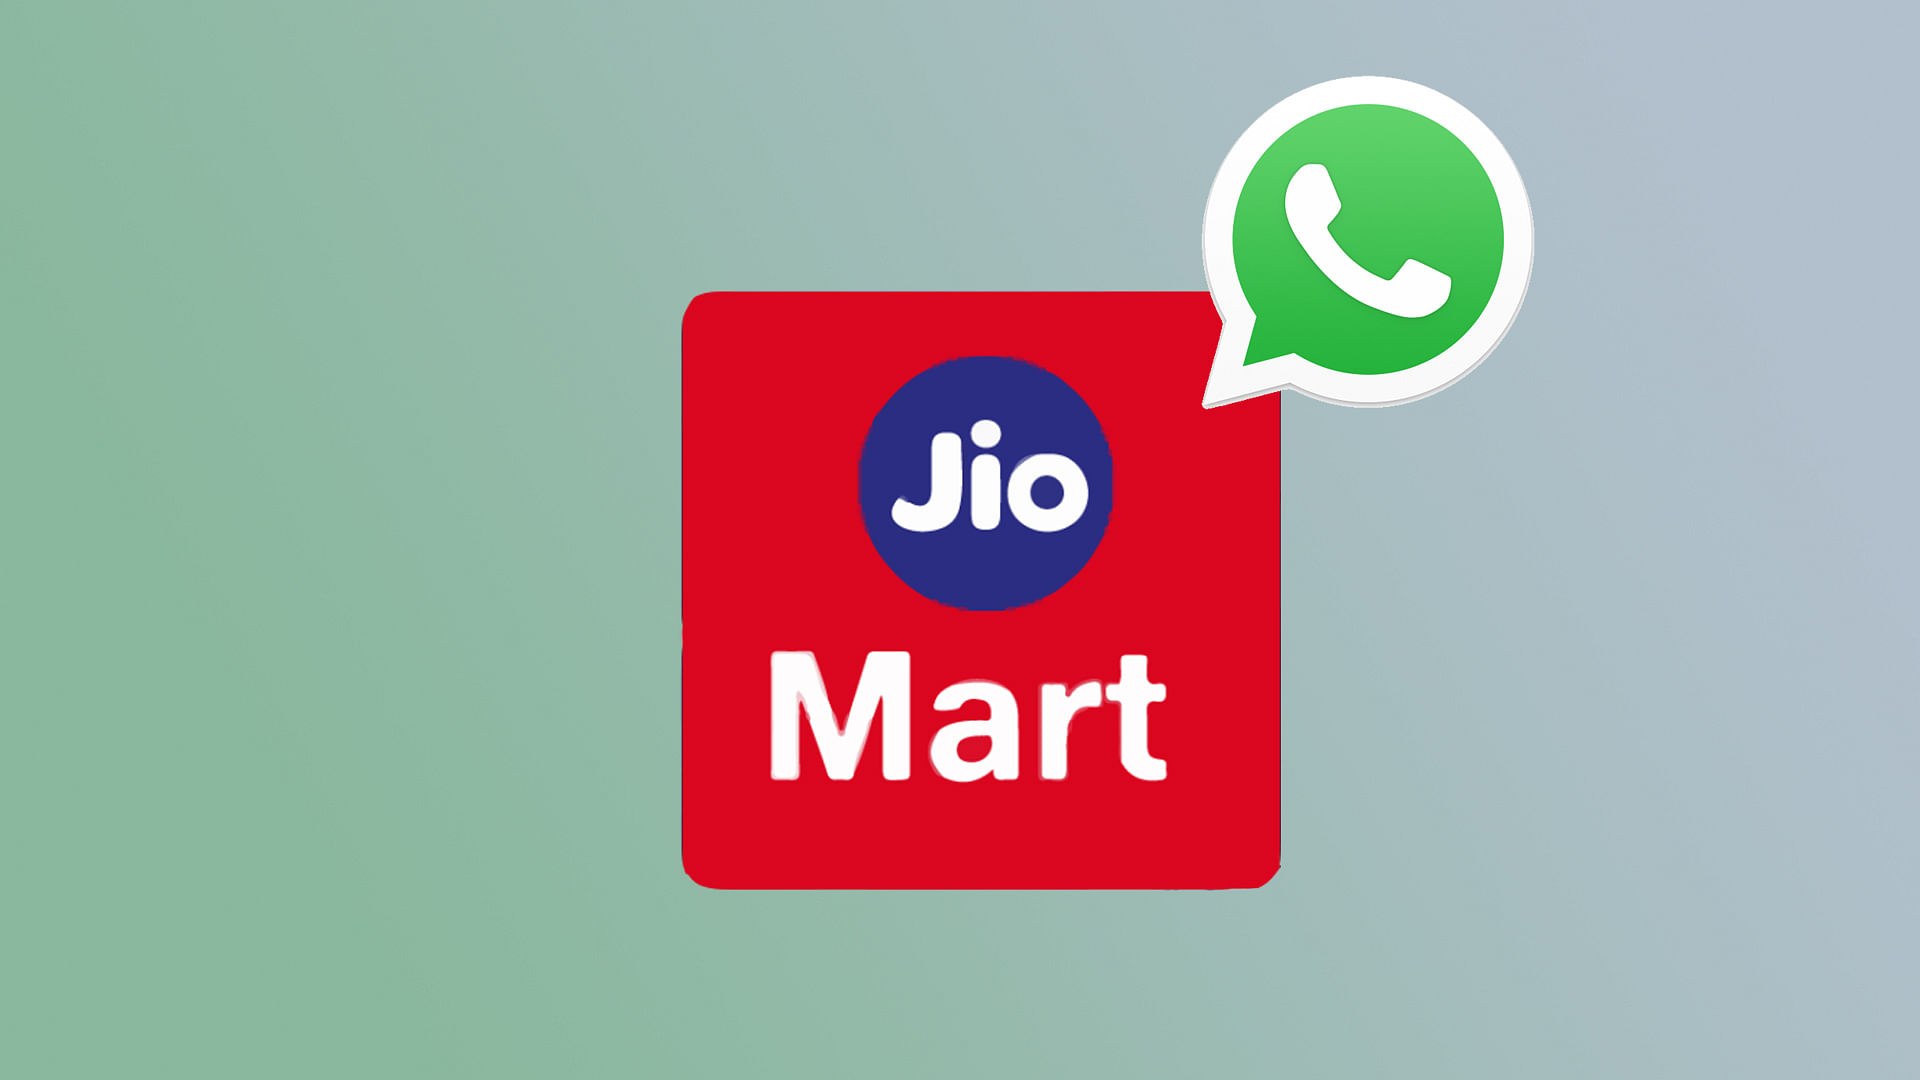 JioMart on WhatsApp has started operations in some parts of Mumbai.